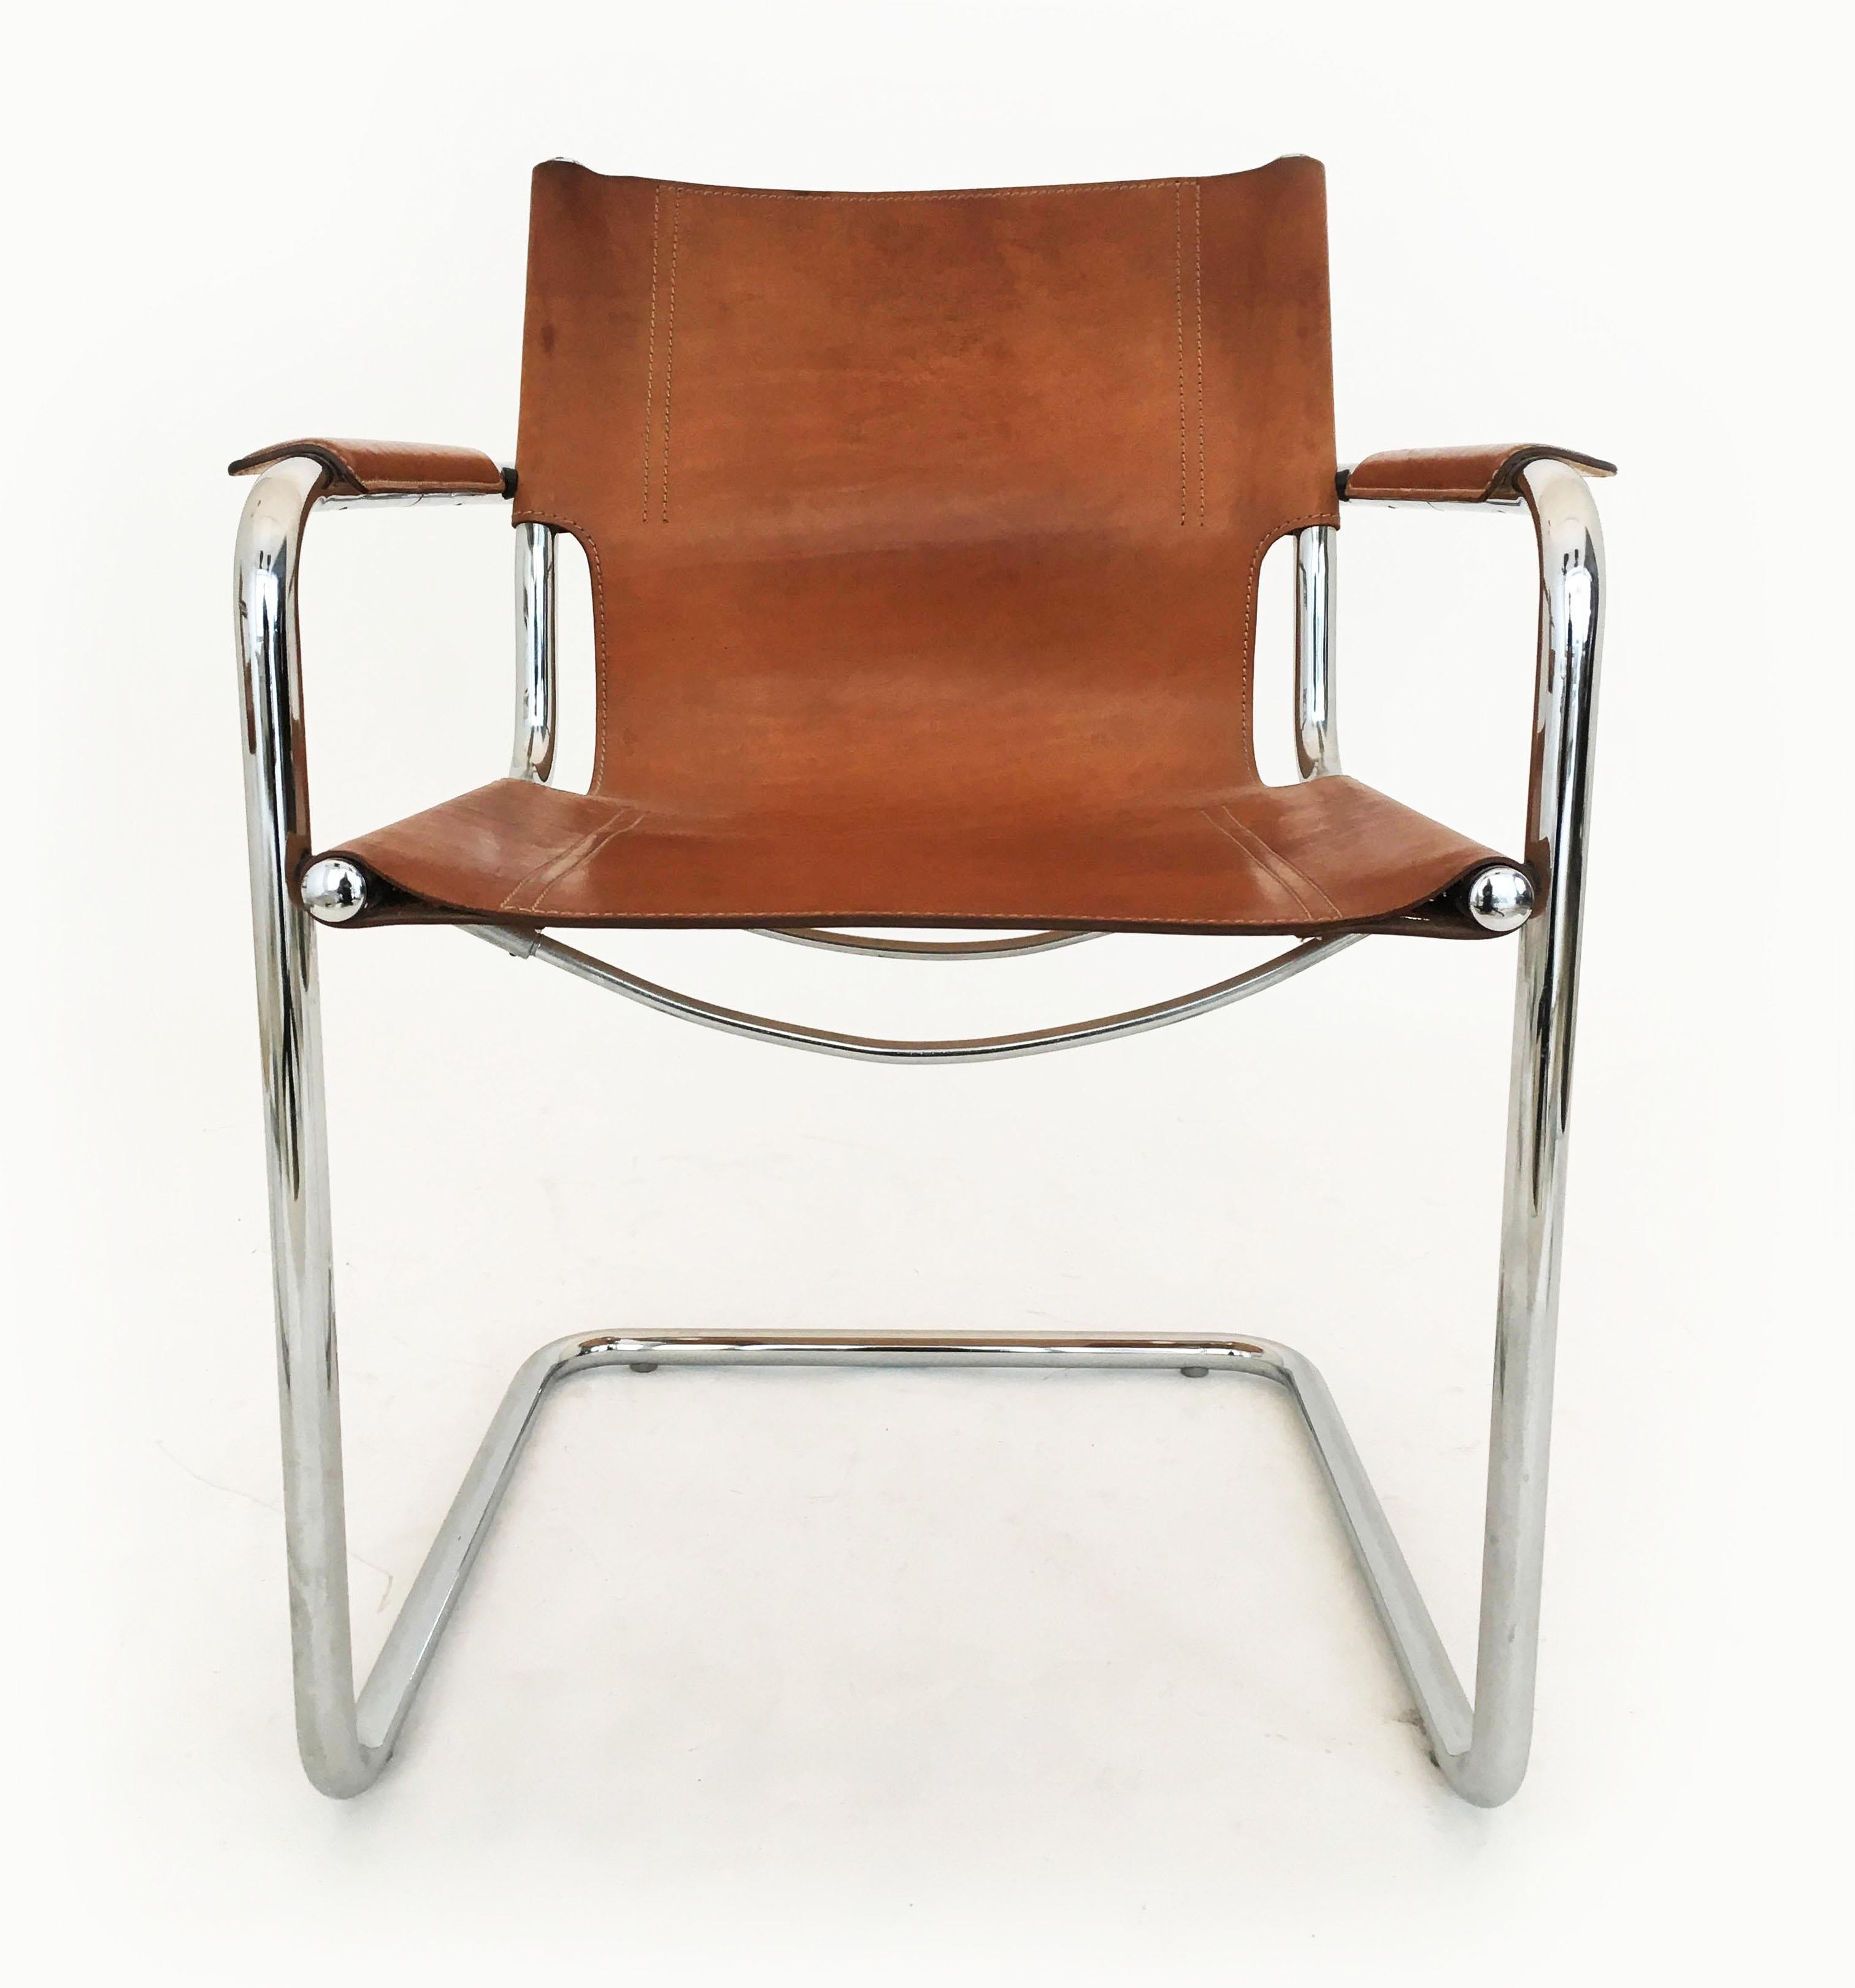 Mid-Century Modern Matteo Grassi Model 'Visitor' Chairs in Patinated Cognac Leather, Italy 1970s